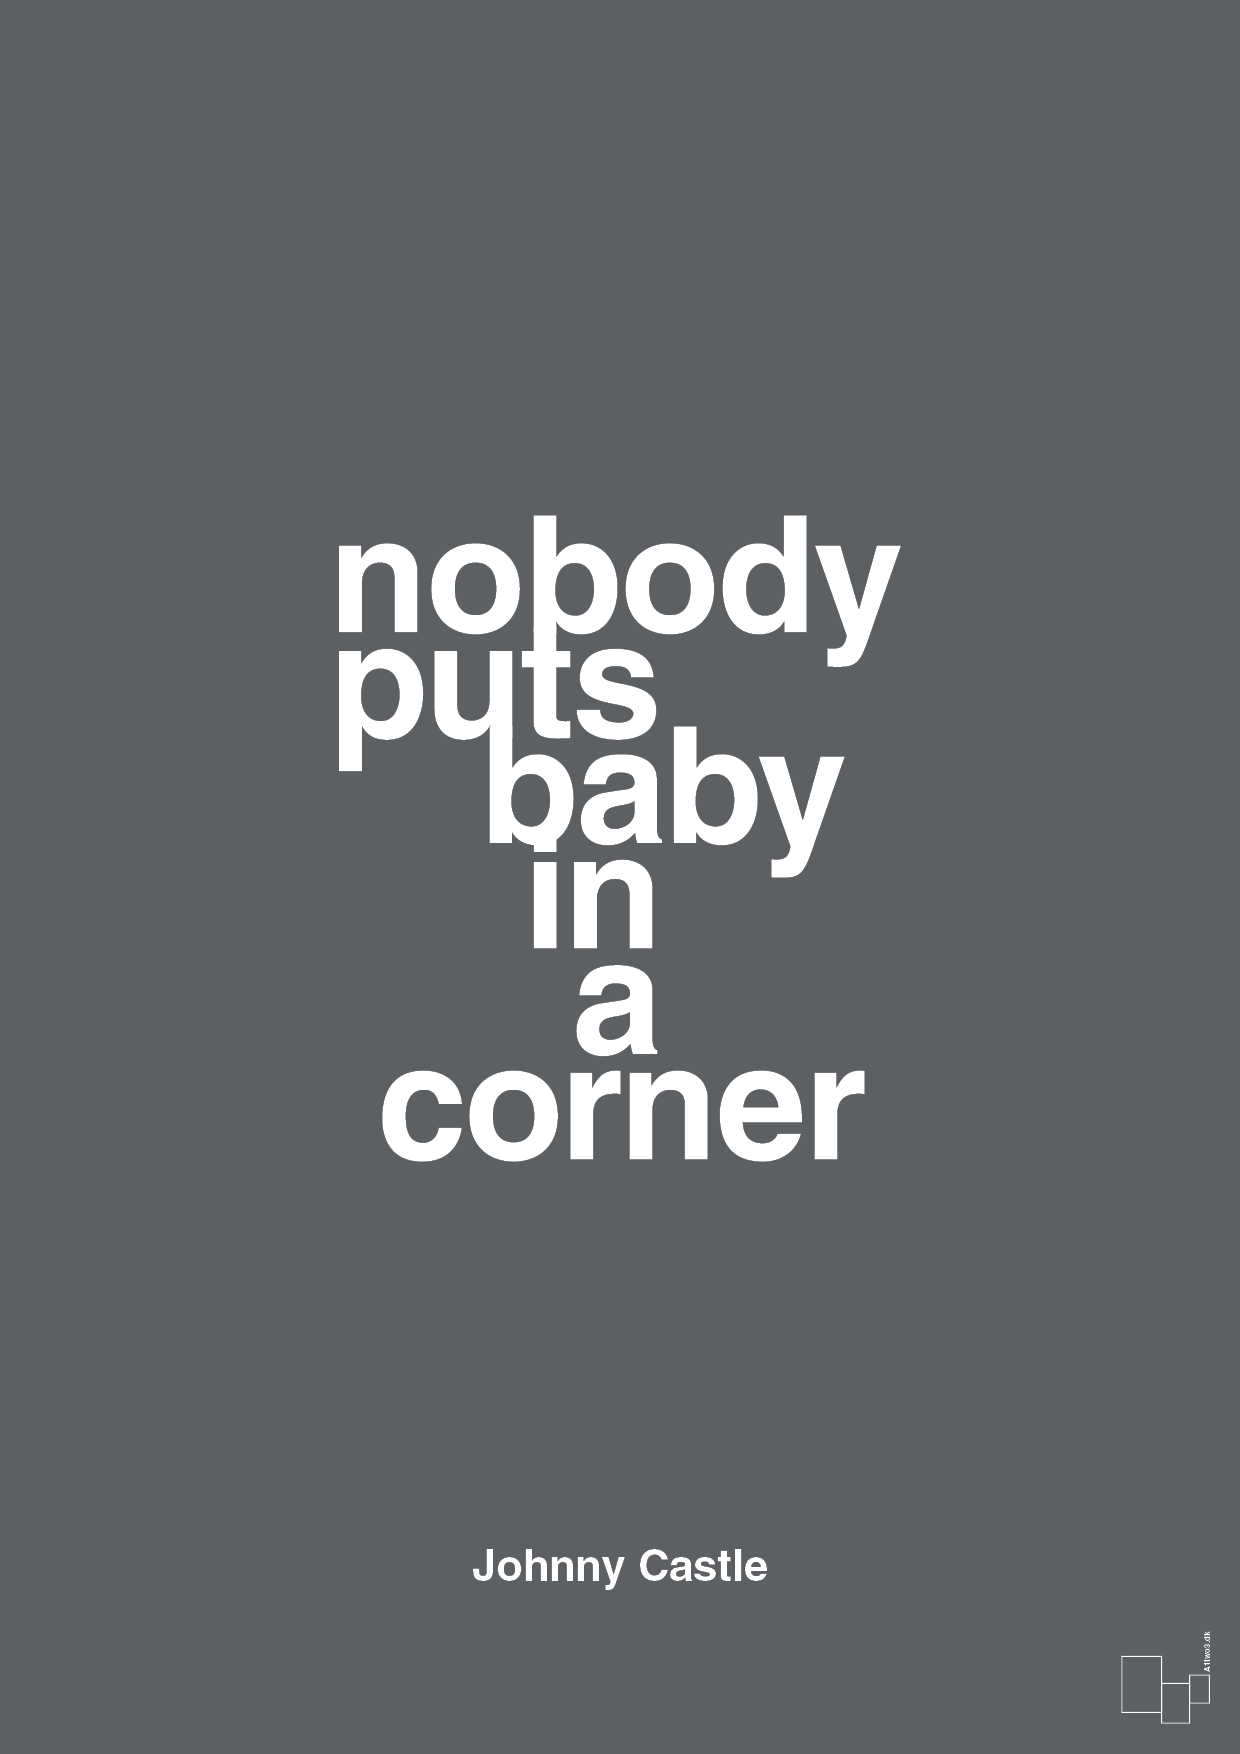 nobody puts baby in a corner - Plakat med Citater i Graphic Charcoal